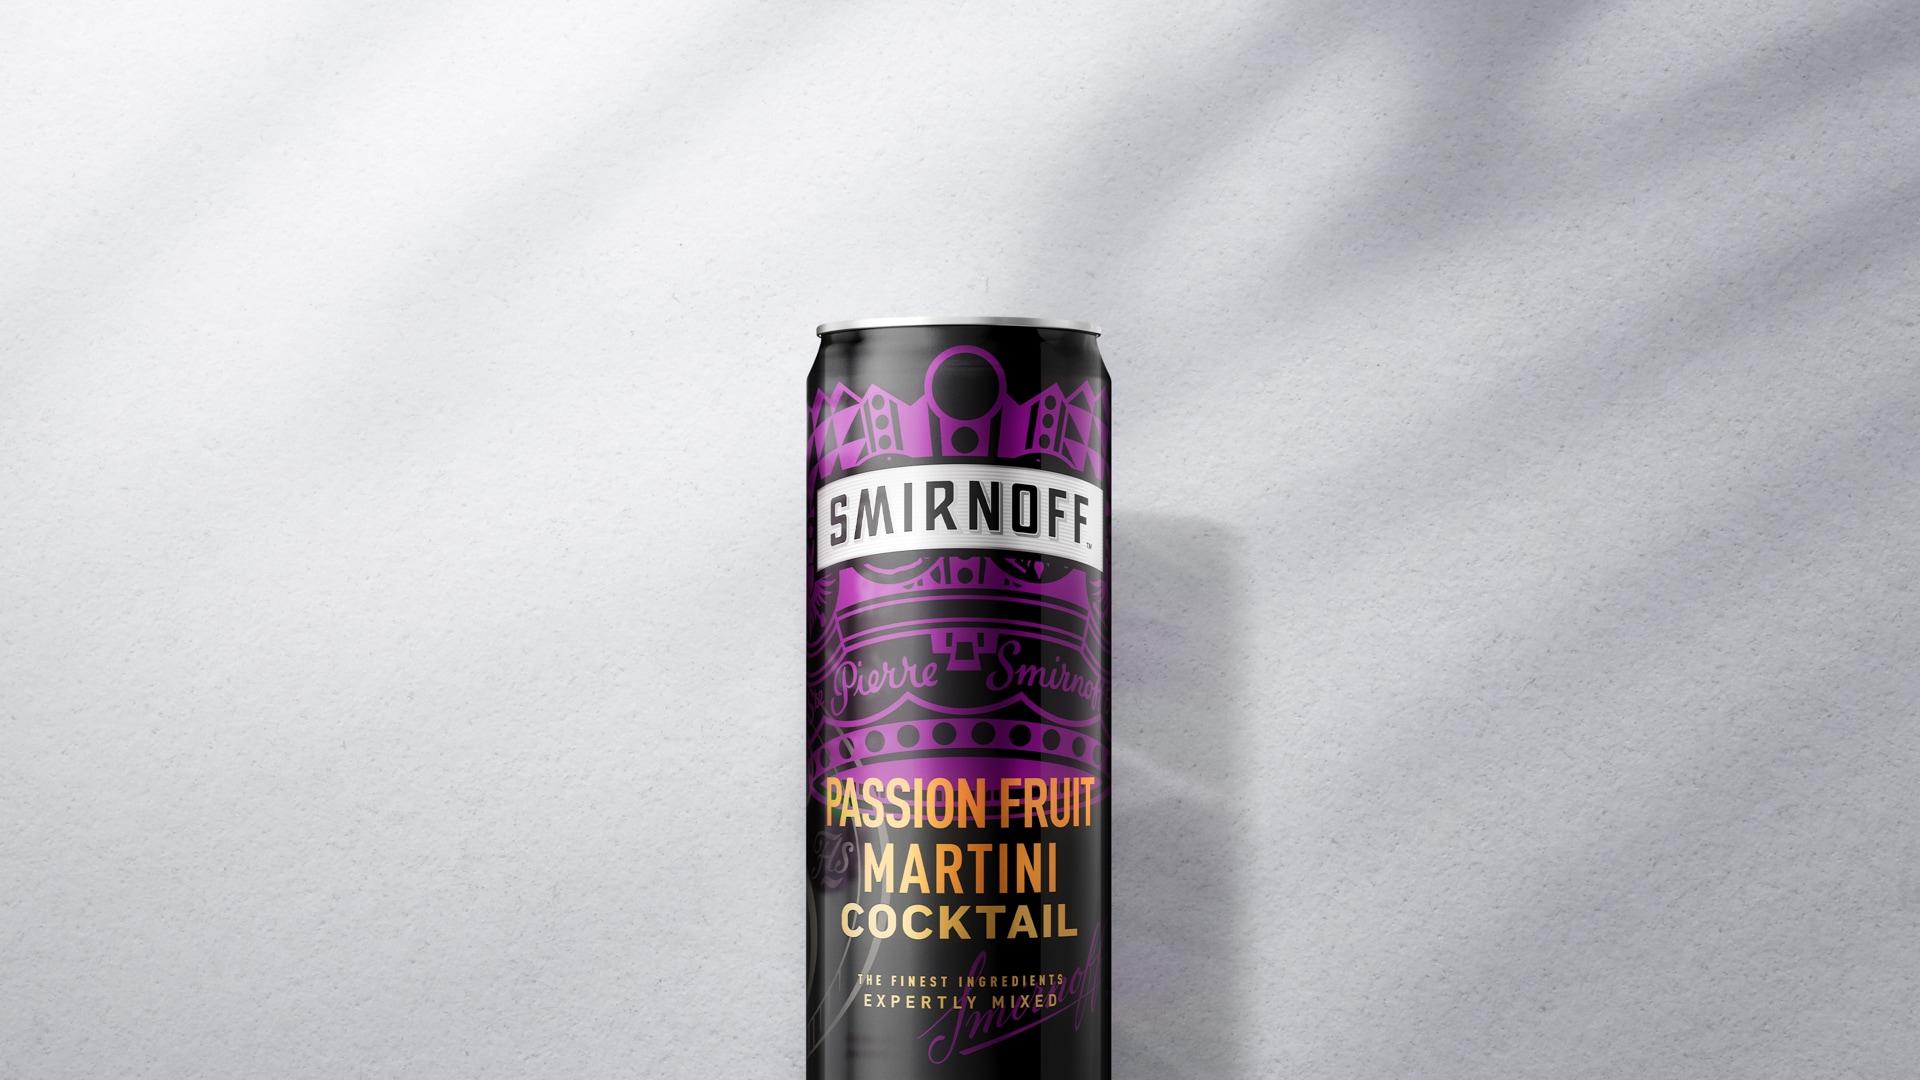 Passionfruit martini cocktail Premix on a gray background